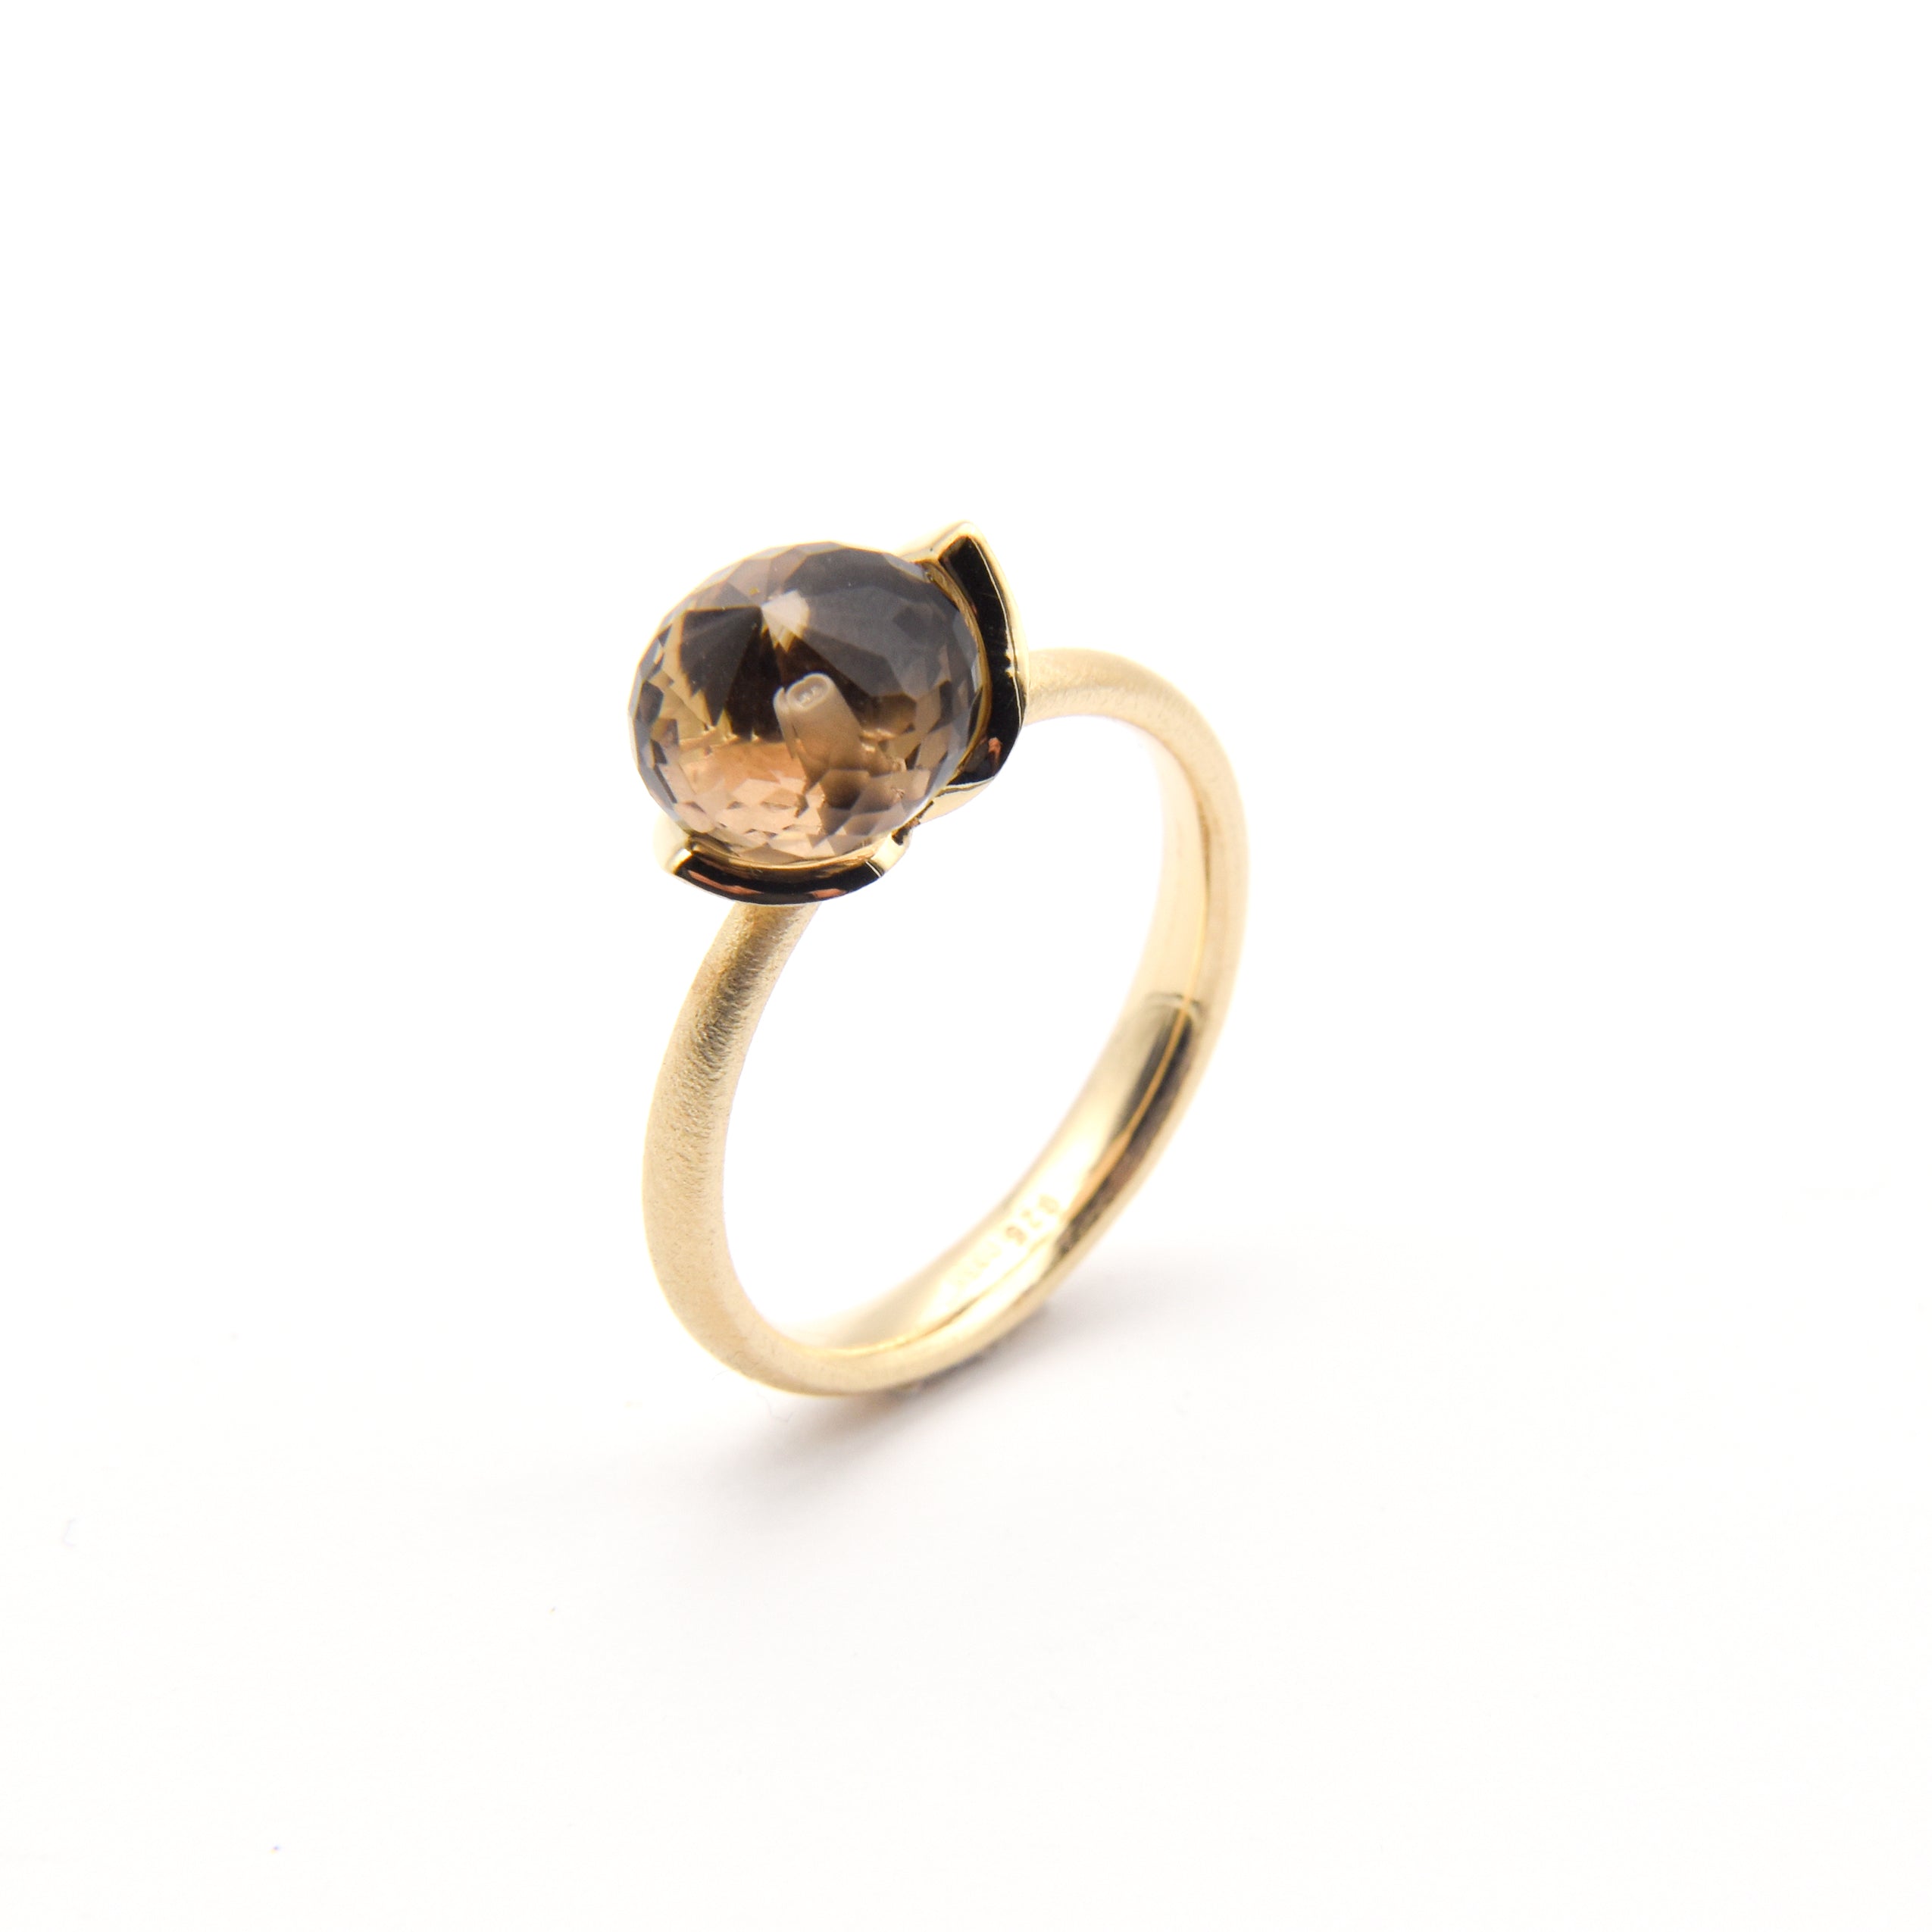 Dolce ring "smal" with smoky quartz 925/-